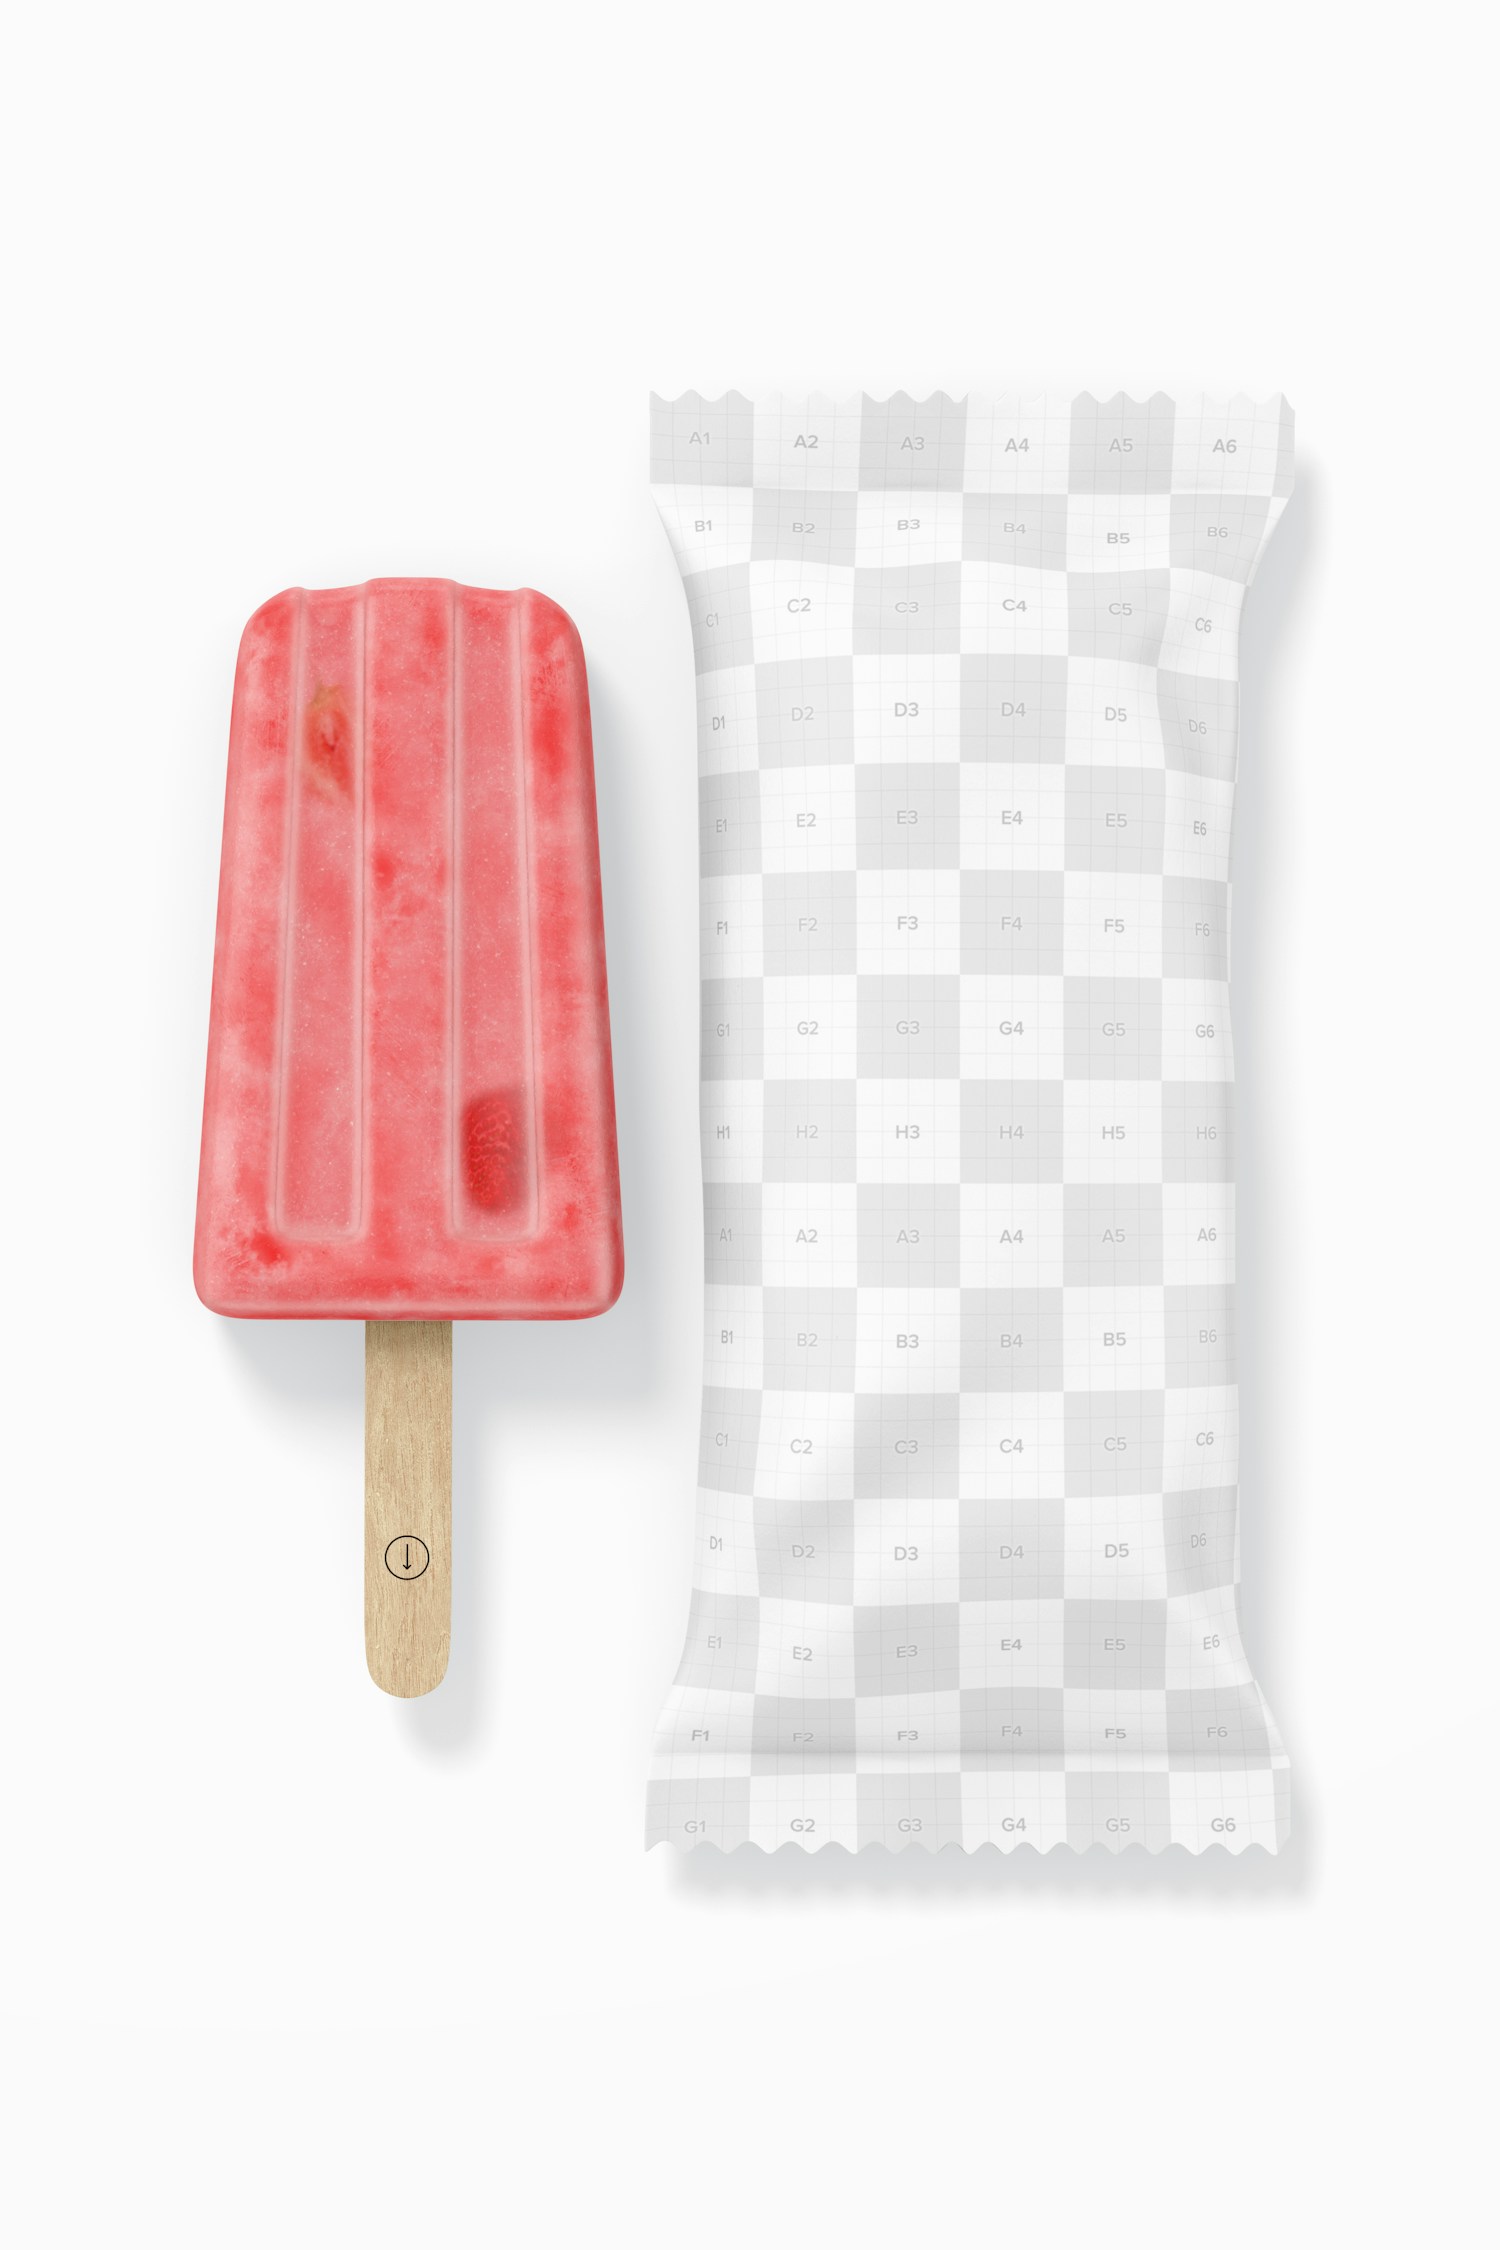 Fruit Popsicle Mockup, Top View